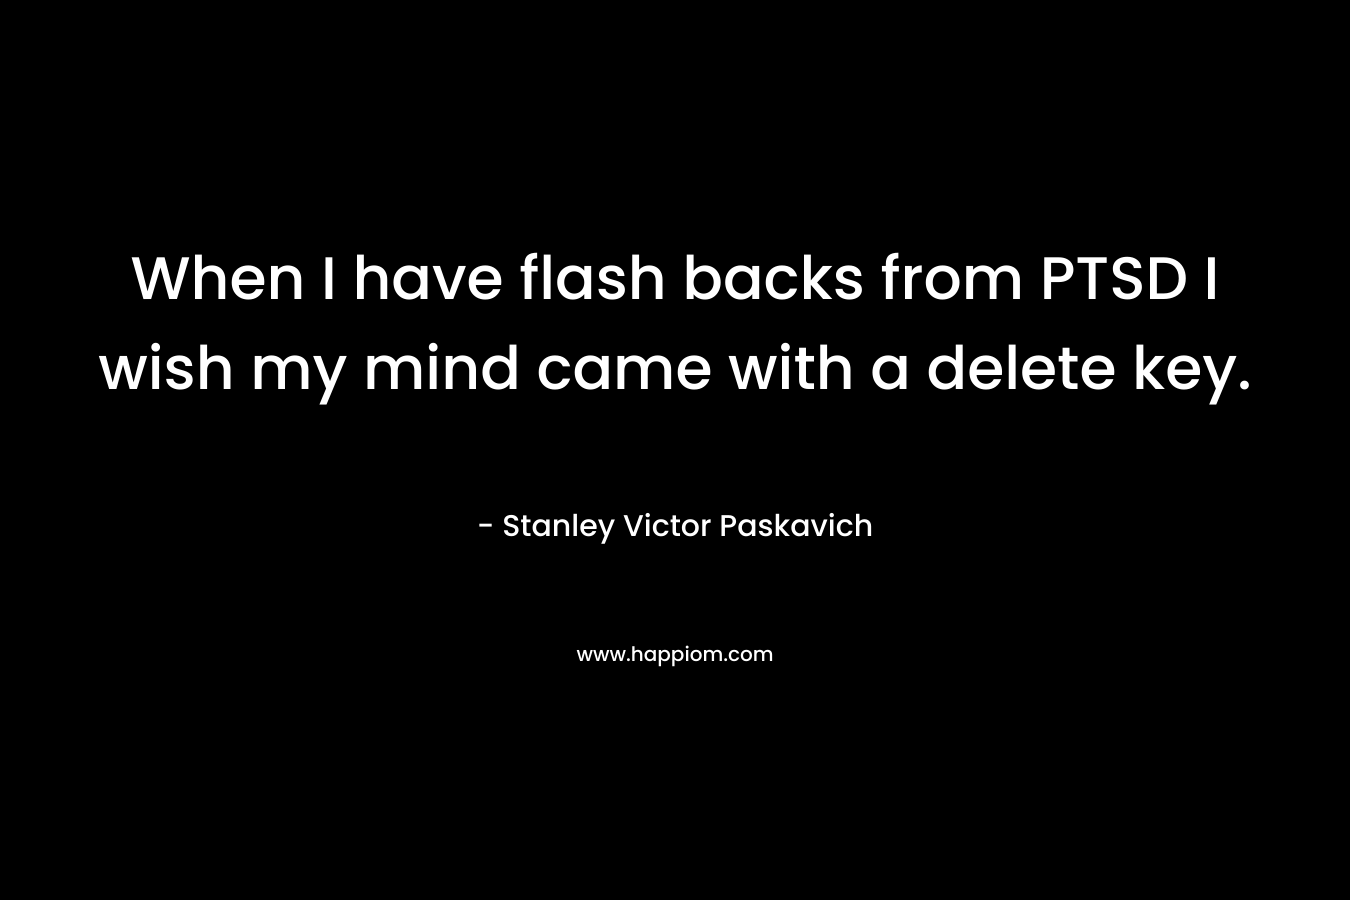 When I have flash backs from PTSD I wish my mind came with a delete key.